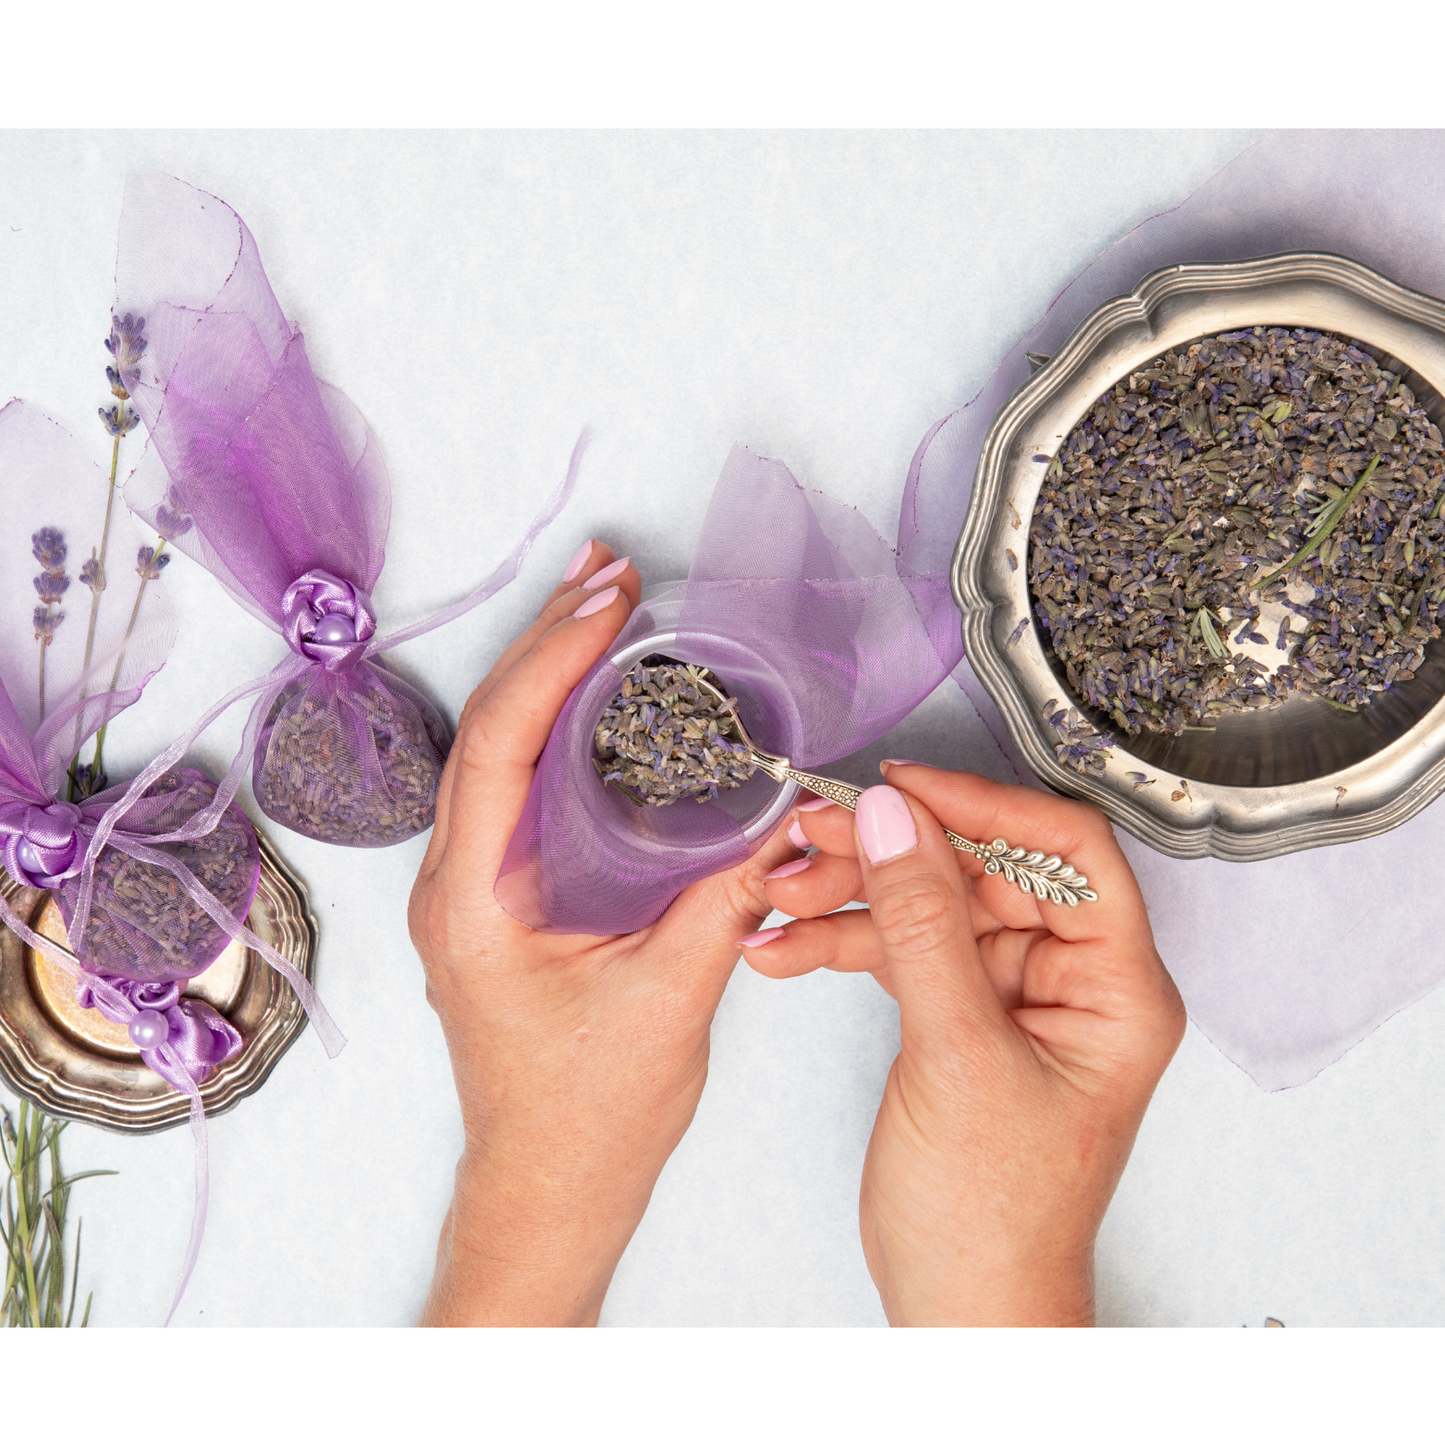 Witchy Pooh's Lavender Flowers for Simmer Pots, Cooking, Crafting, Tea, Relaxation and Sleep Aid